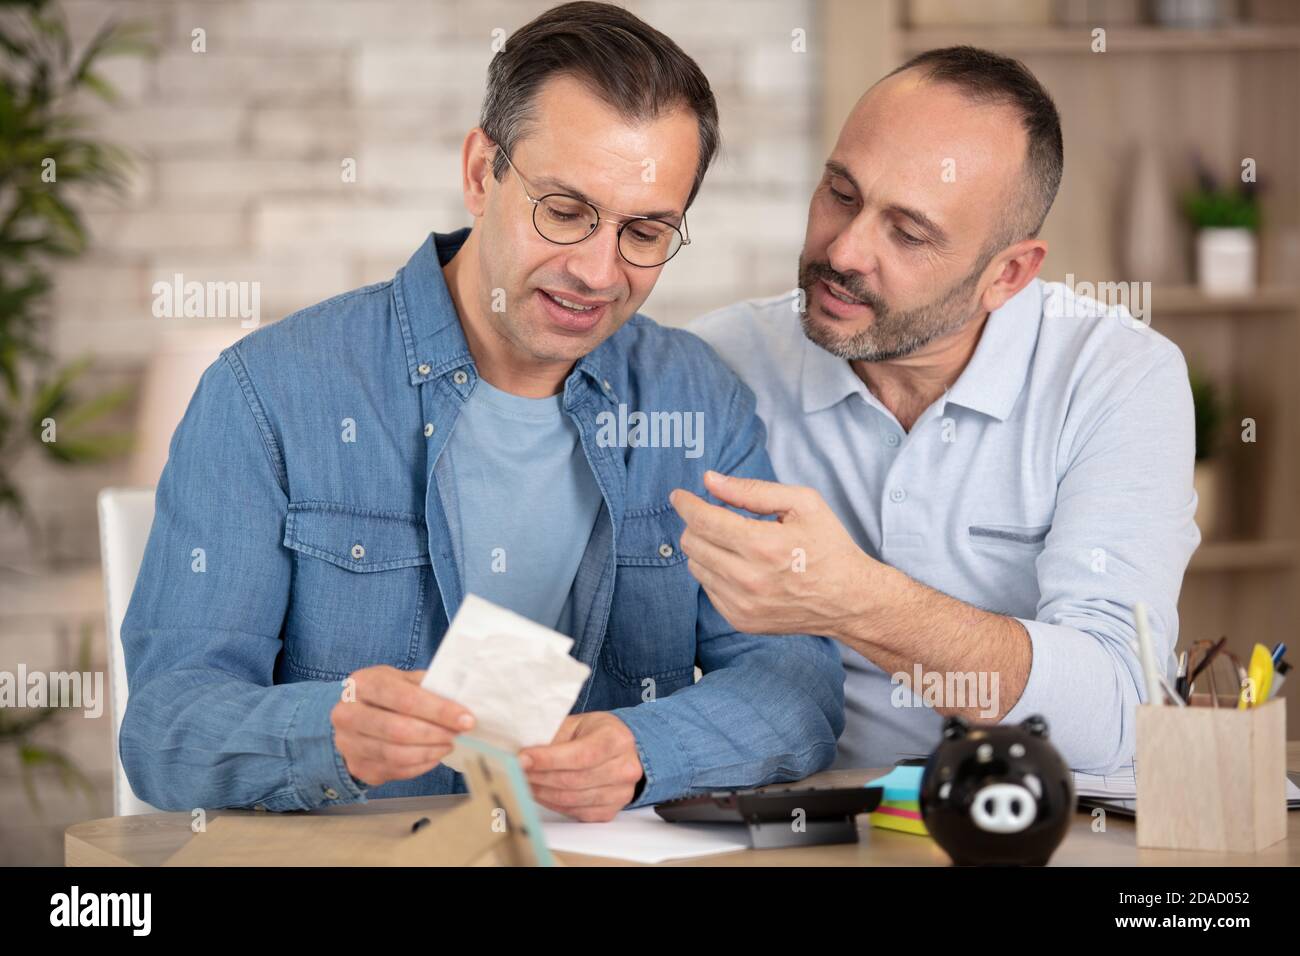 gay couples dpaying bill together Stock Photo